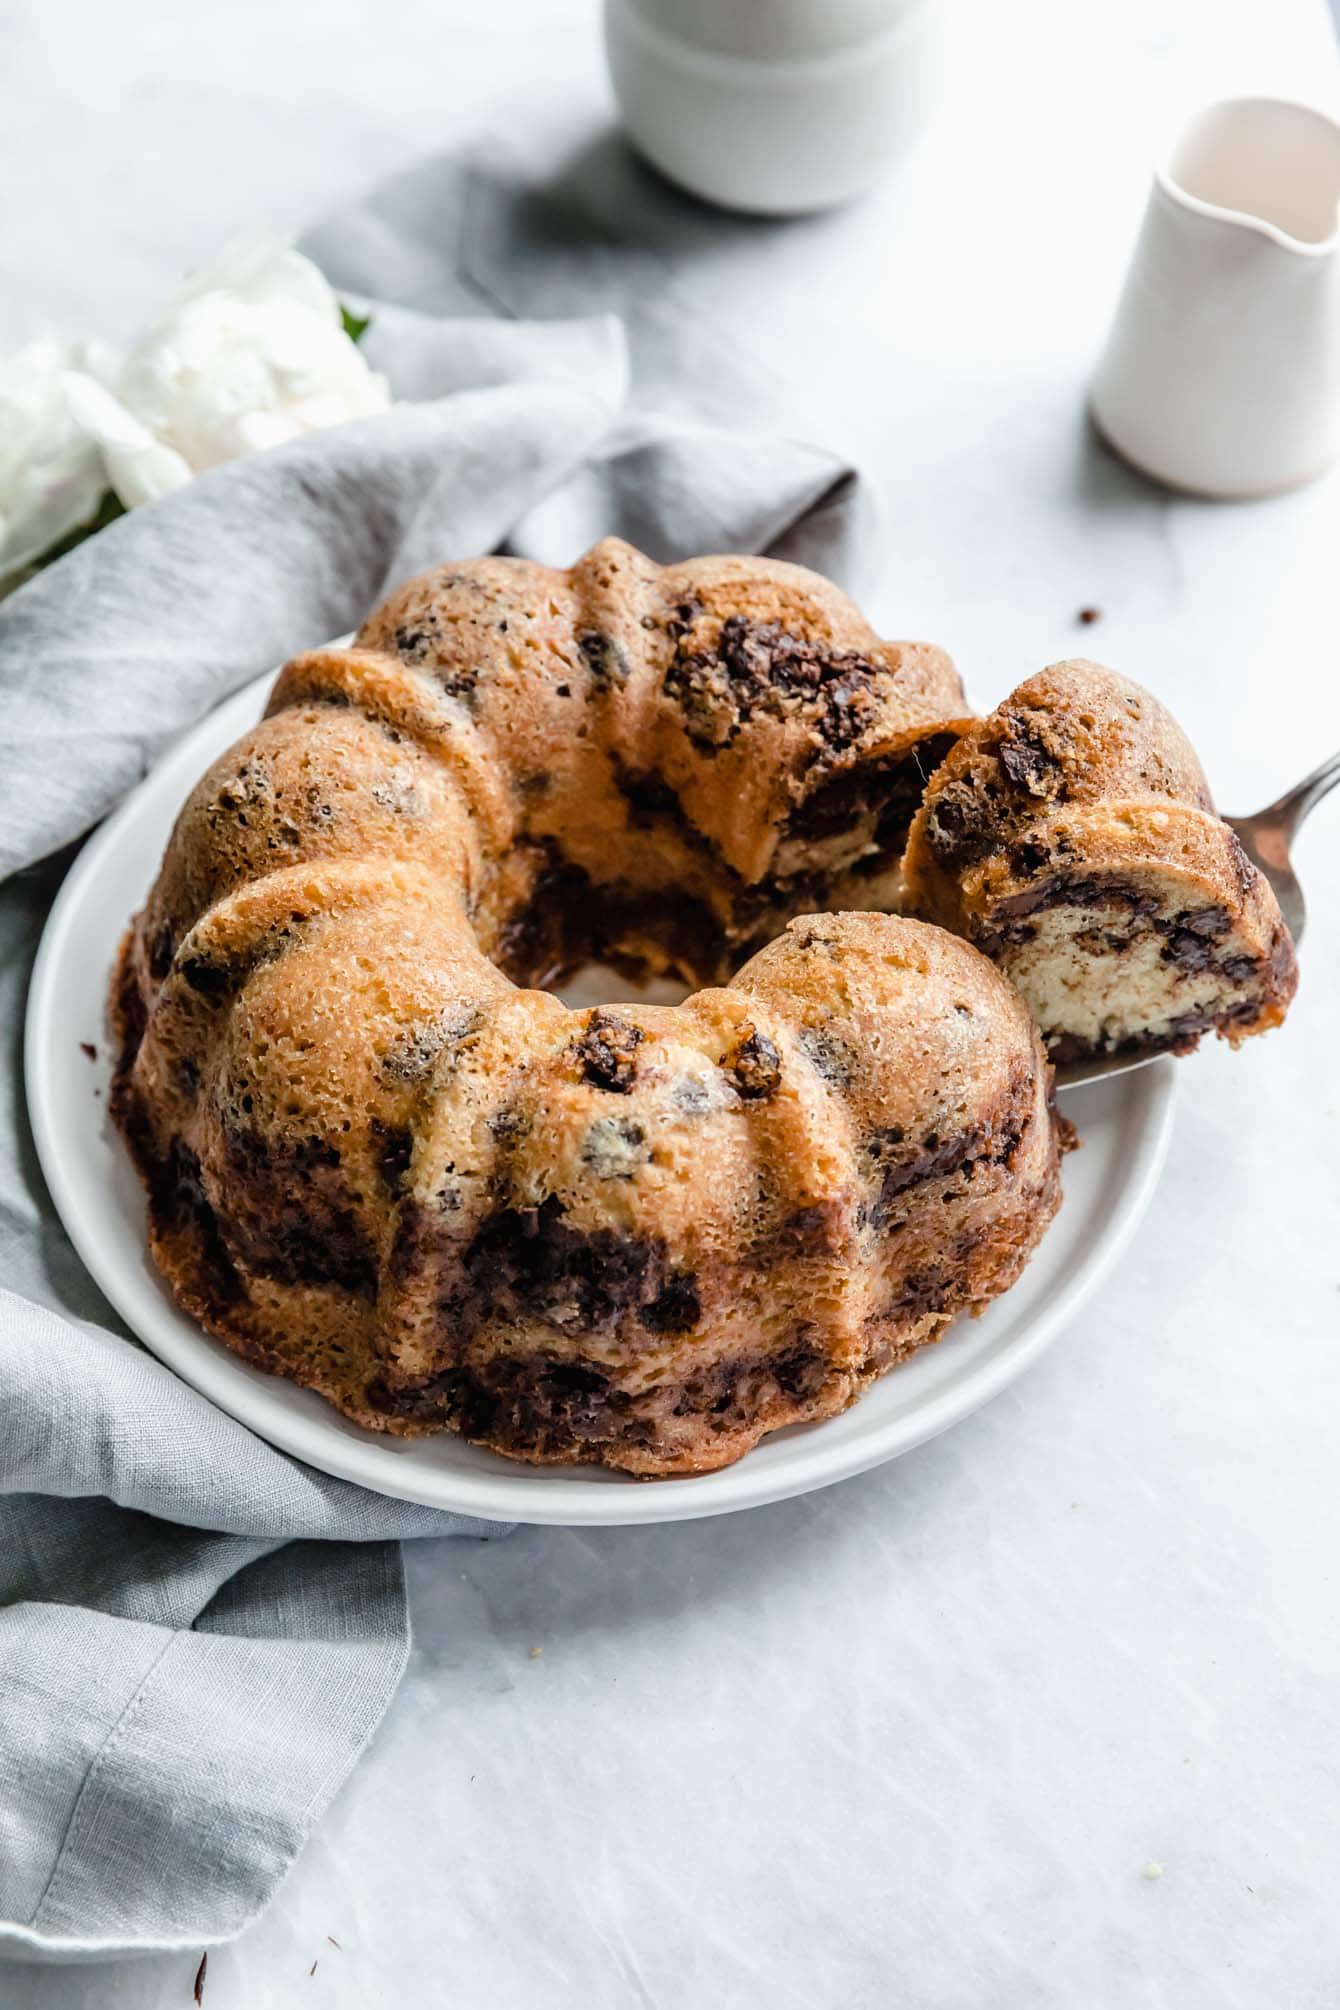 I love a good dessert disguised as breakfast. This buttery and moist Cinnamon Chocolate Chip Coffee Cake is sure to make your morning a little sweeter.